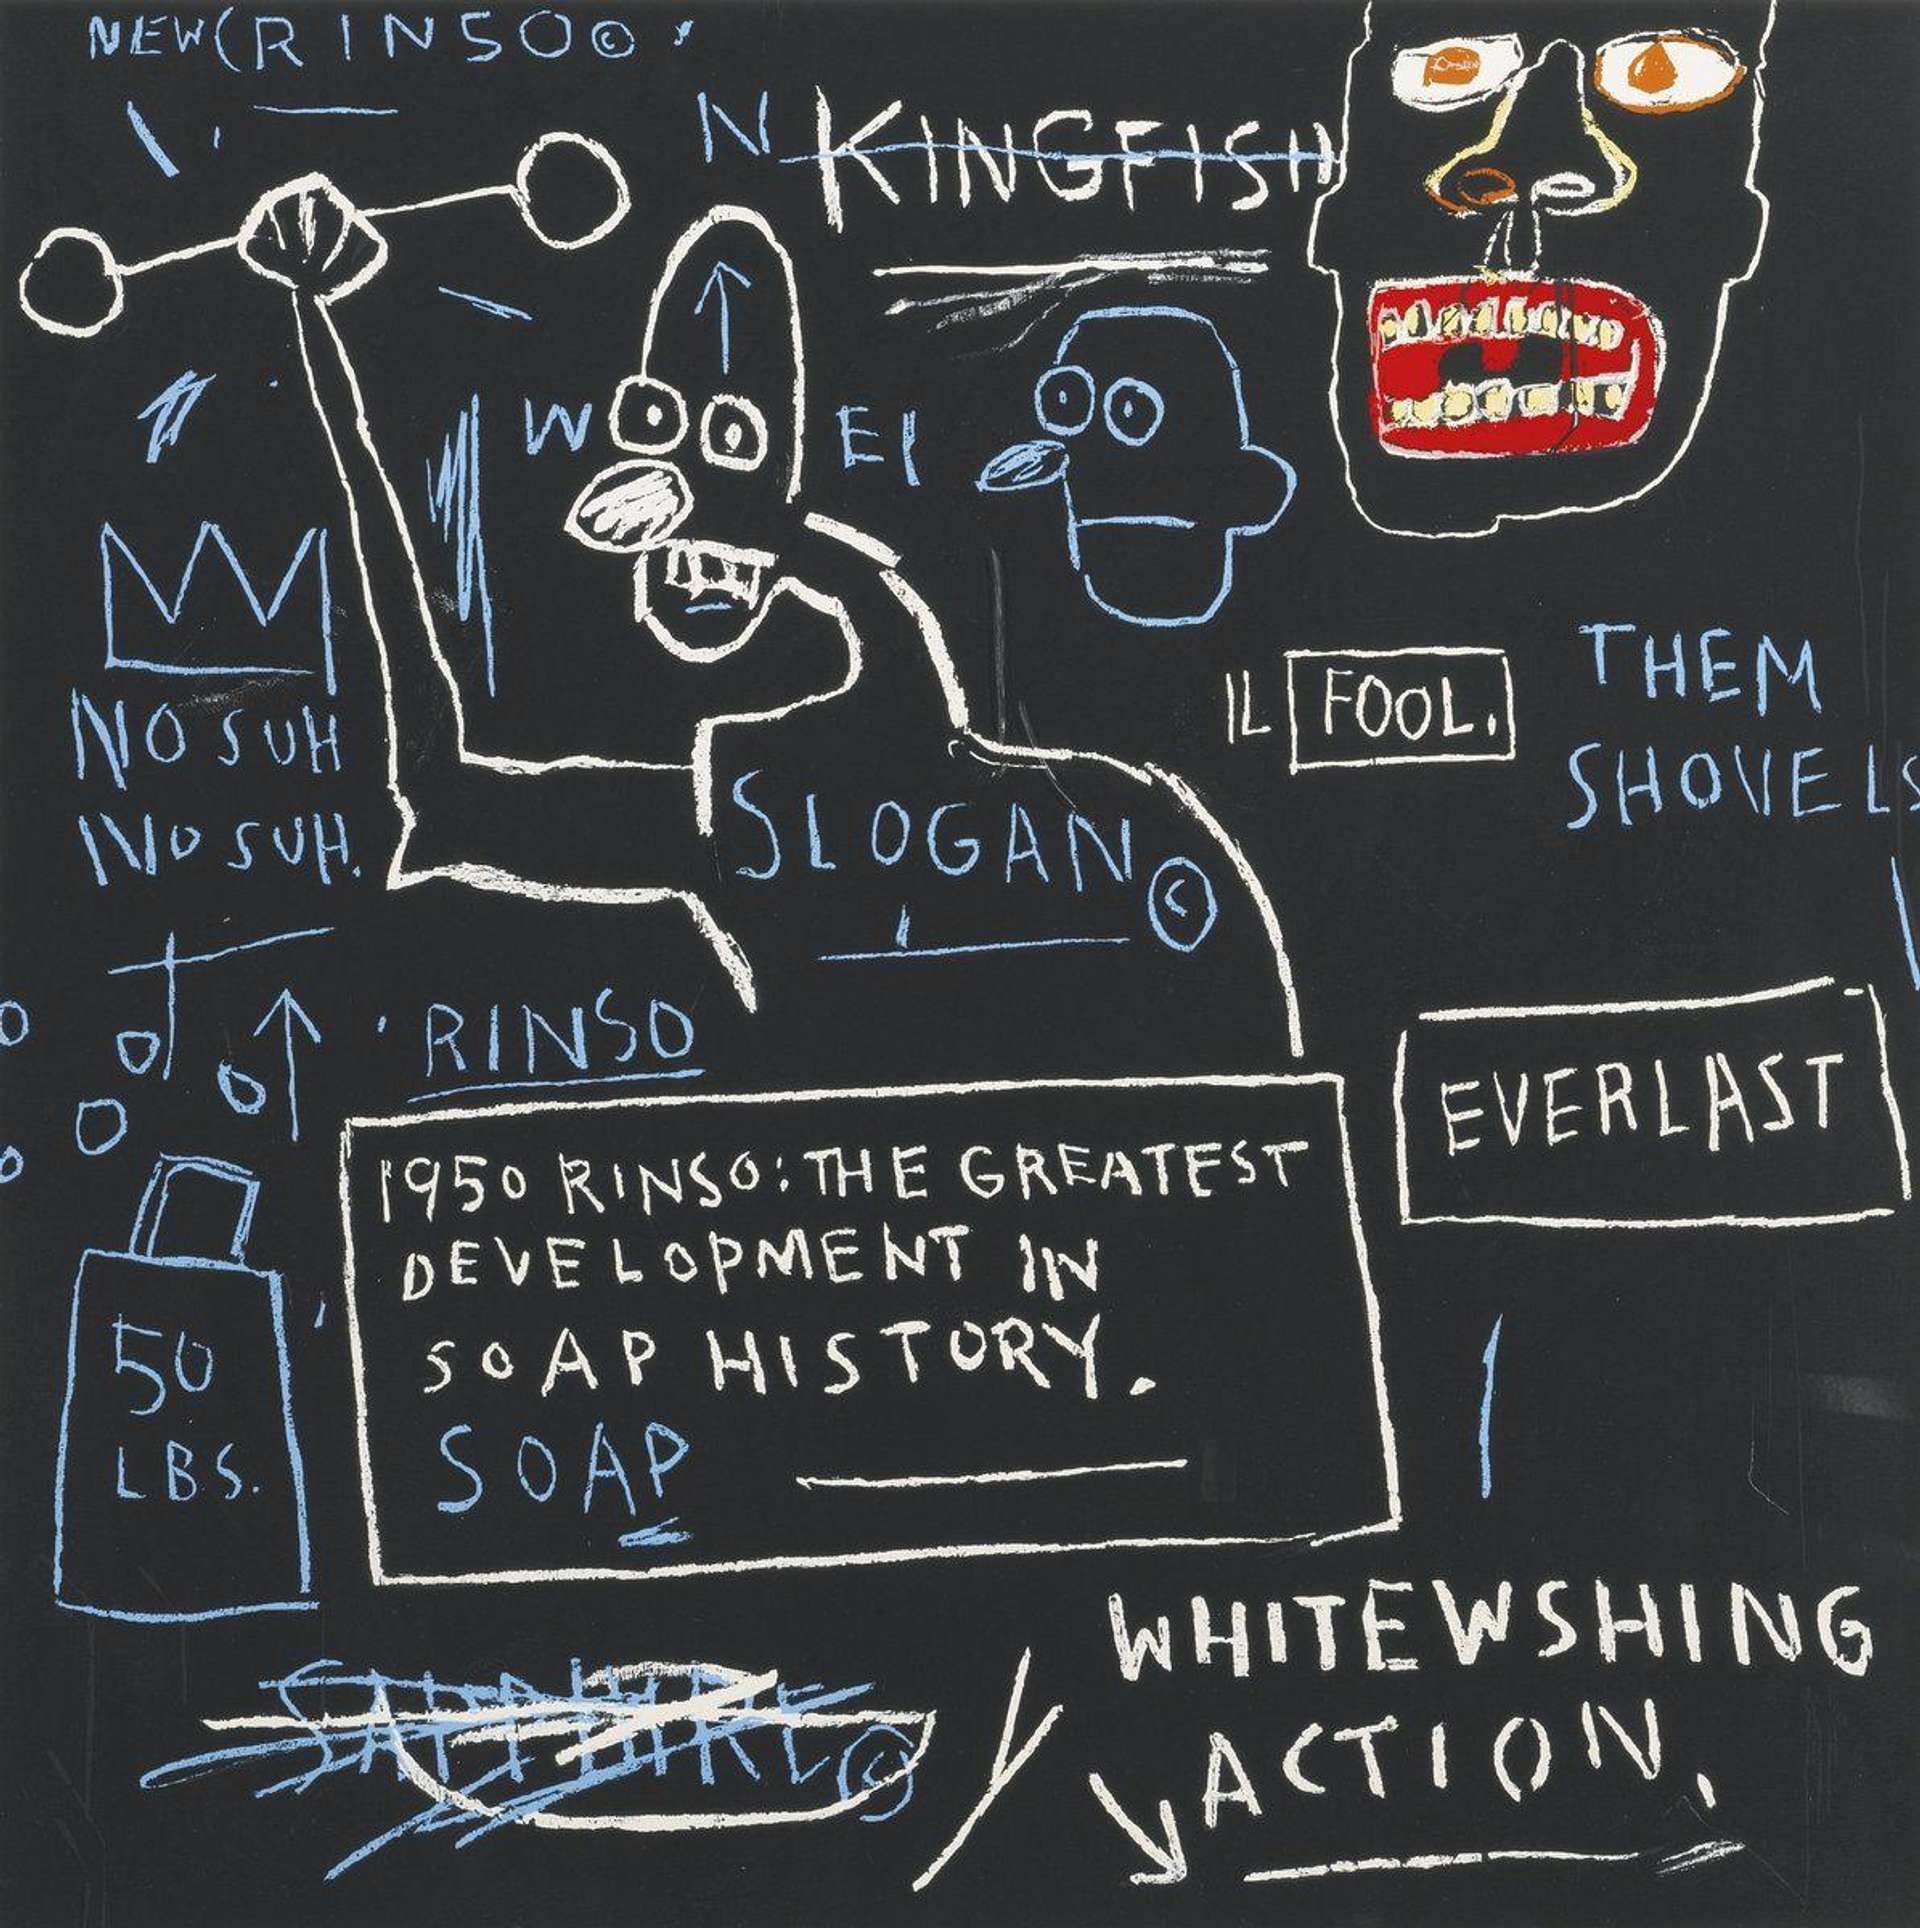 Rinso is a screen print in colours by Jean-Michel Basquiat produced in 1982. In Rinso, the central figure is drawn in loose yet strident white marks, appearing to grit their teeth, with a tool raised in a clenched fist, perhaps depicting a protesting industrial or agricultural worker. The reference to ‘them shovels’ lends further evidence to this interpretation. The text across the chest of the figure reads ‘SLOGAN’ next to the copyright symbol, a motif which appears recurrently throughout Basquiat’s oeuvre in unexpected contexts.